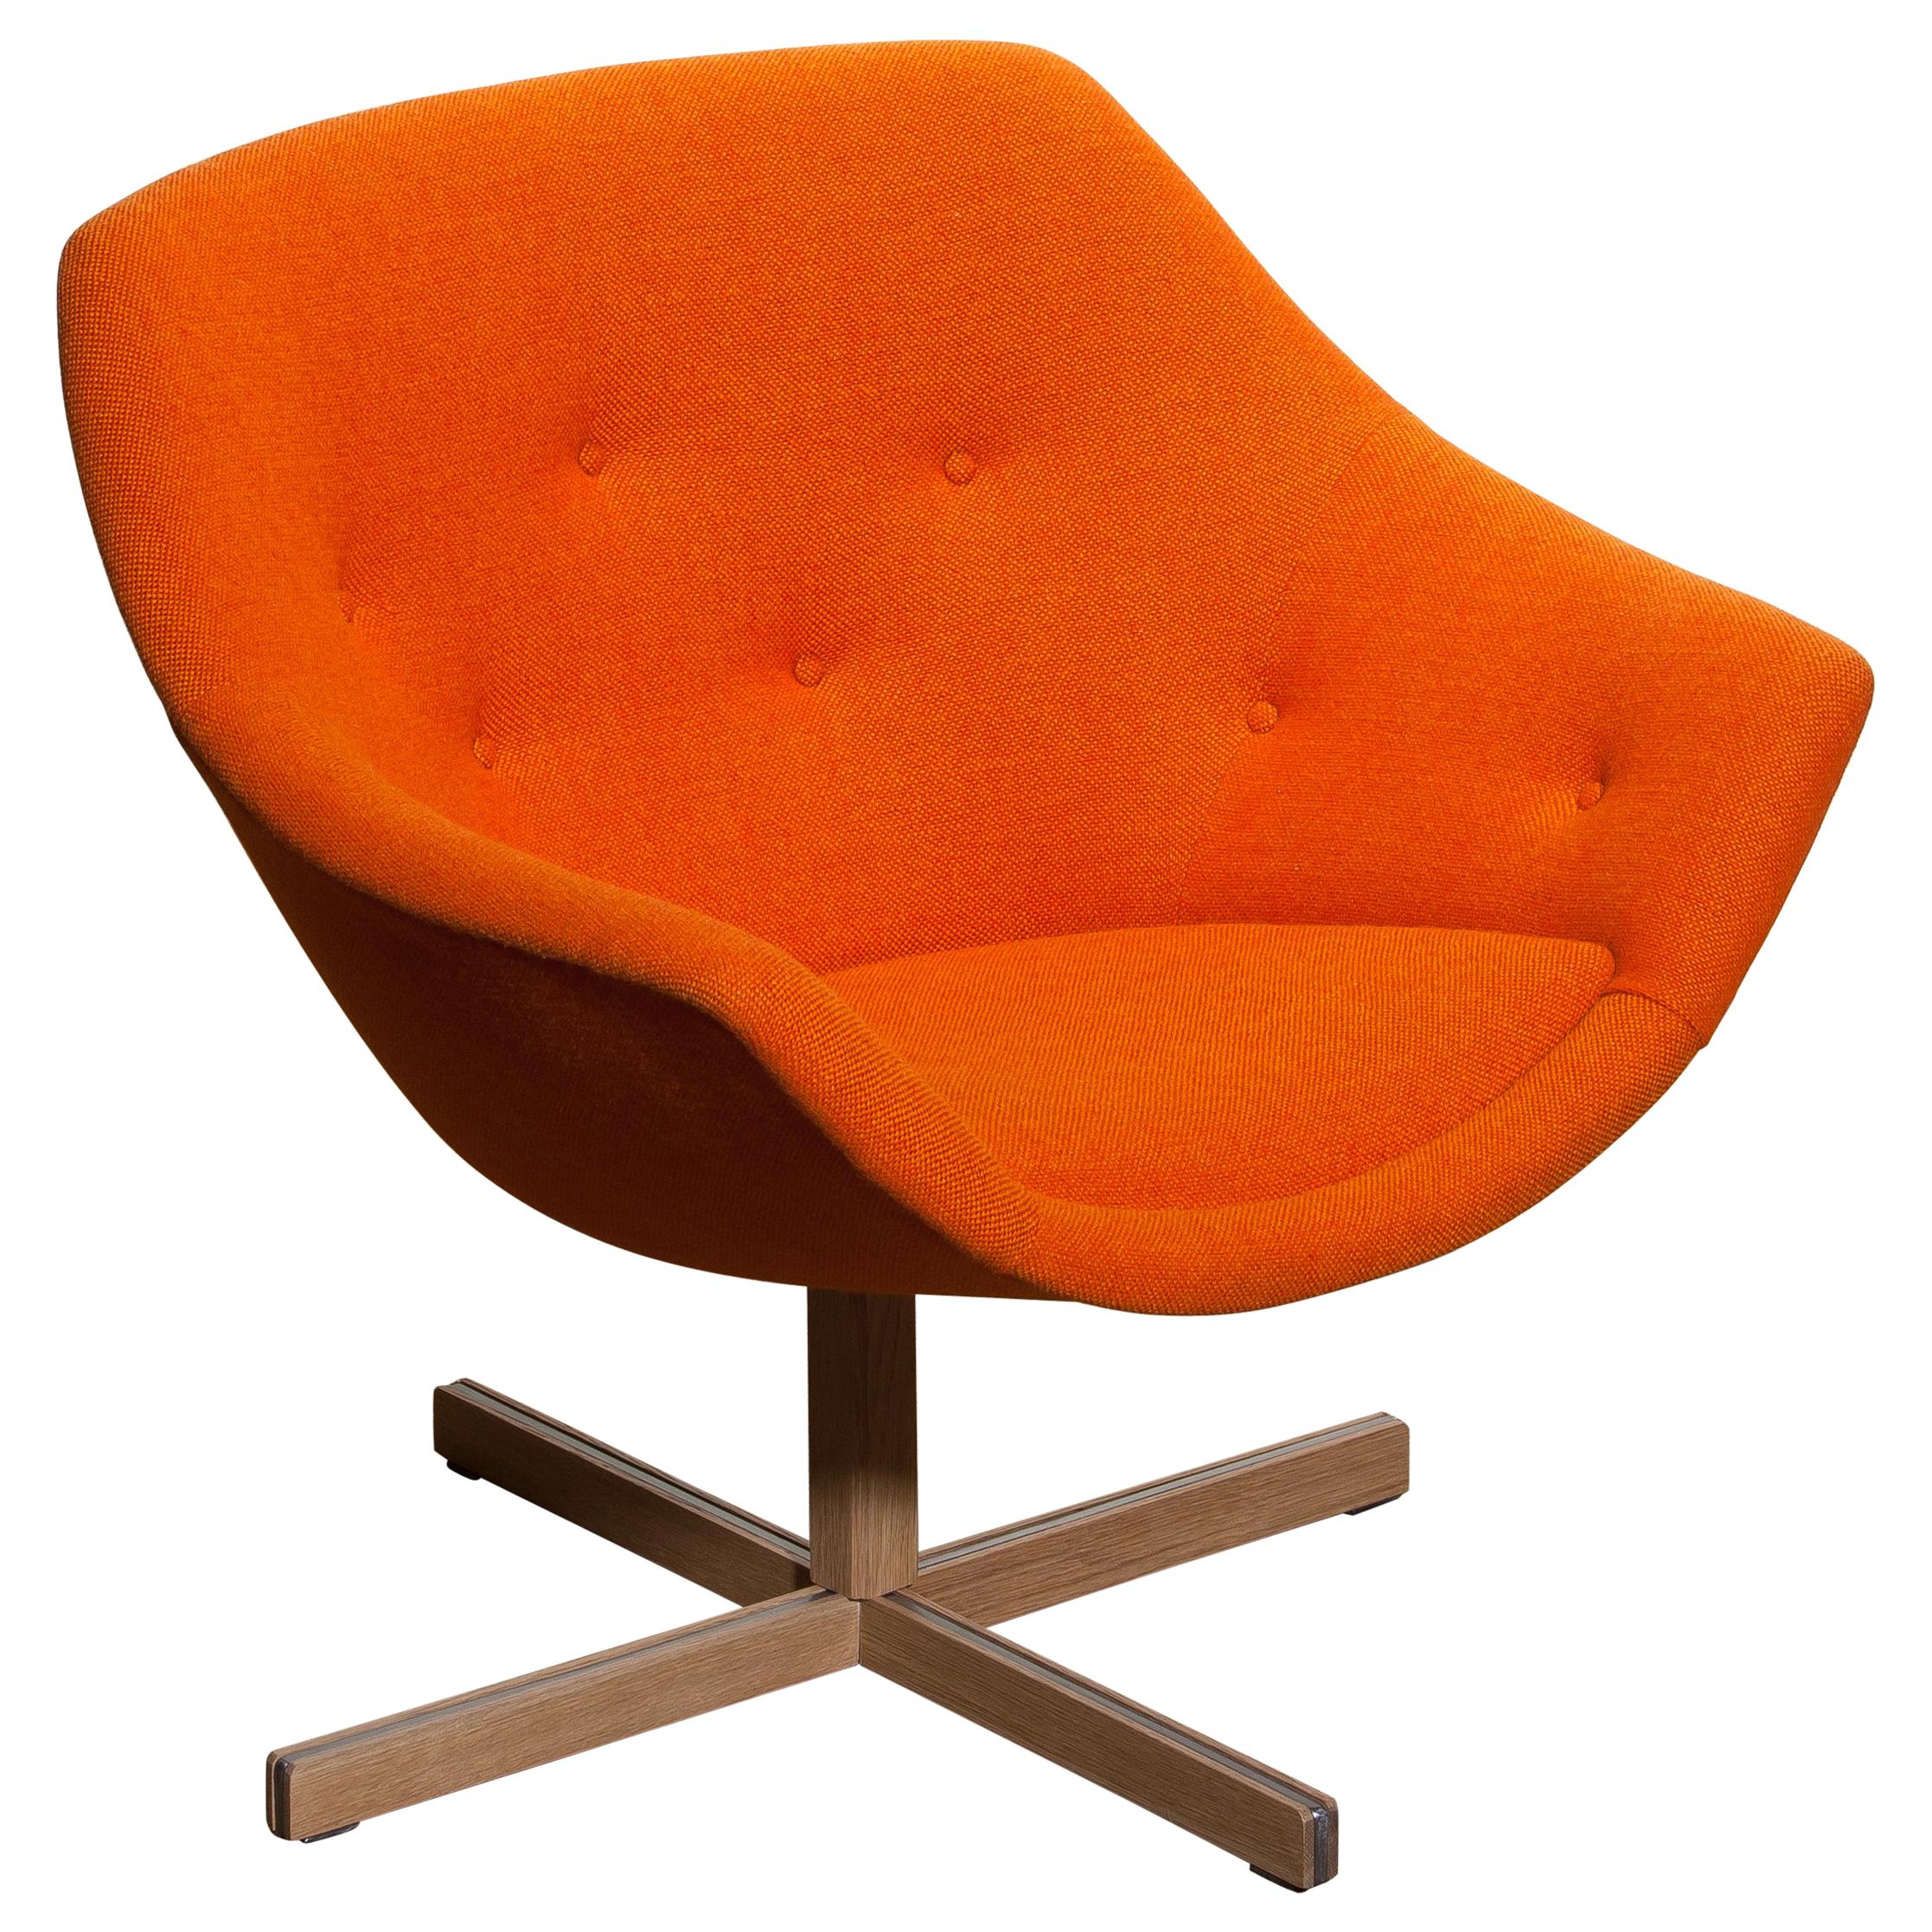 Fantastic Mandariini swivel chair made by Carl Gustaf Hiort for Puunveisto Oy, wood work Ltd. This chair is upholstered with a buttoned orange fabric 'Hallingdal' by Kvadrat designed by Nanna Ditzel on an oak swivel base.
It is in perfect and